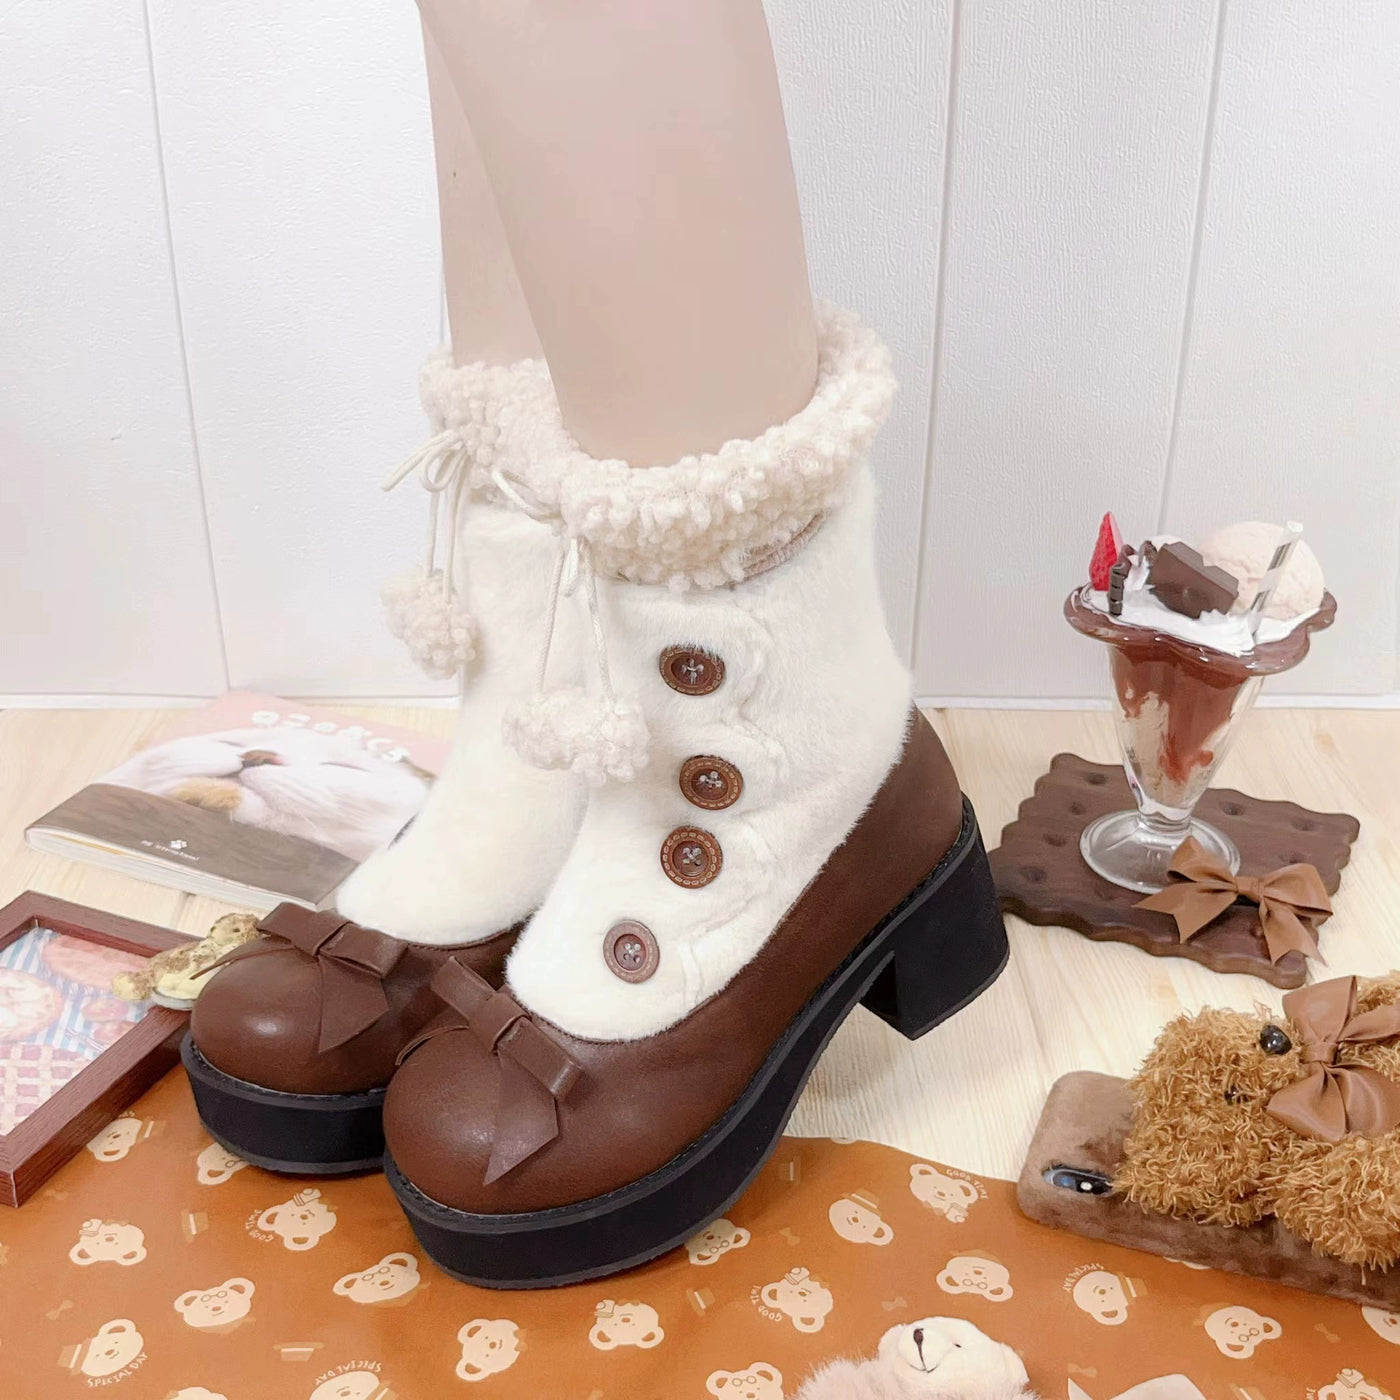 Dolly Doll~Winter Lolita Boots Fur Mary Jane Lolita Low Heel Shoes   